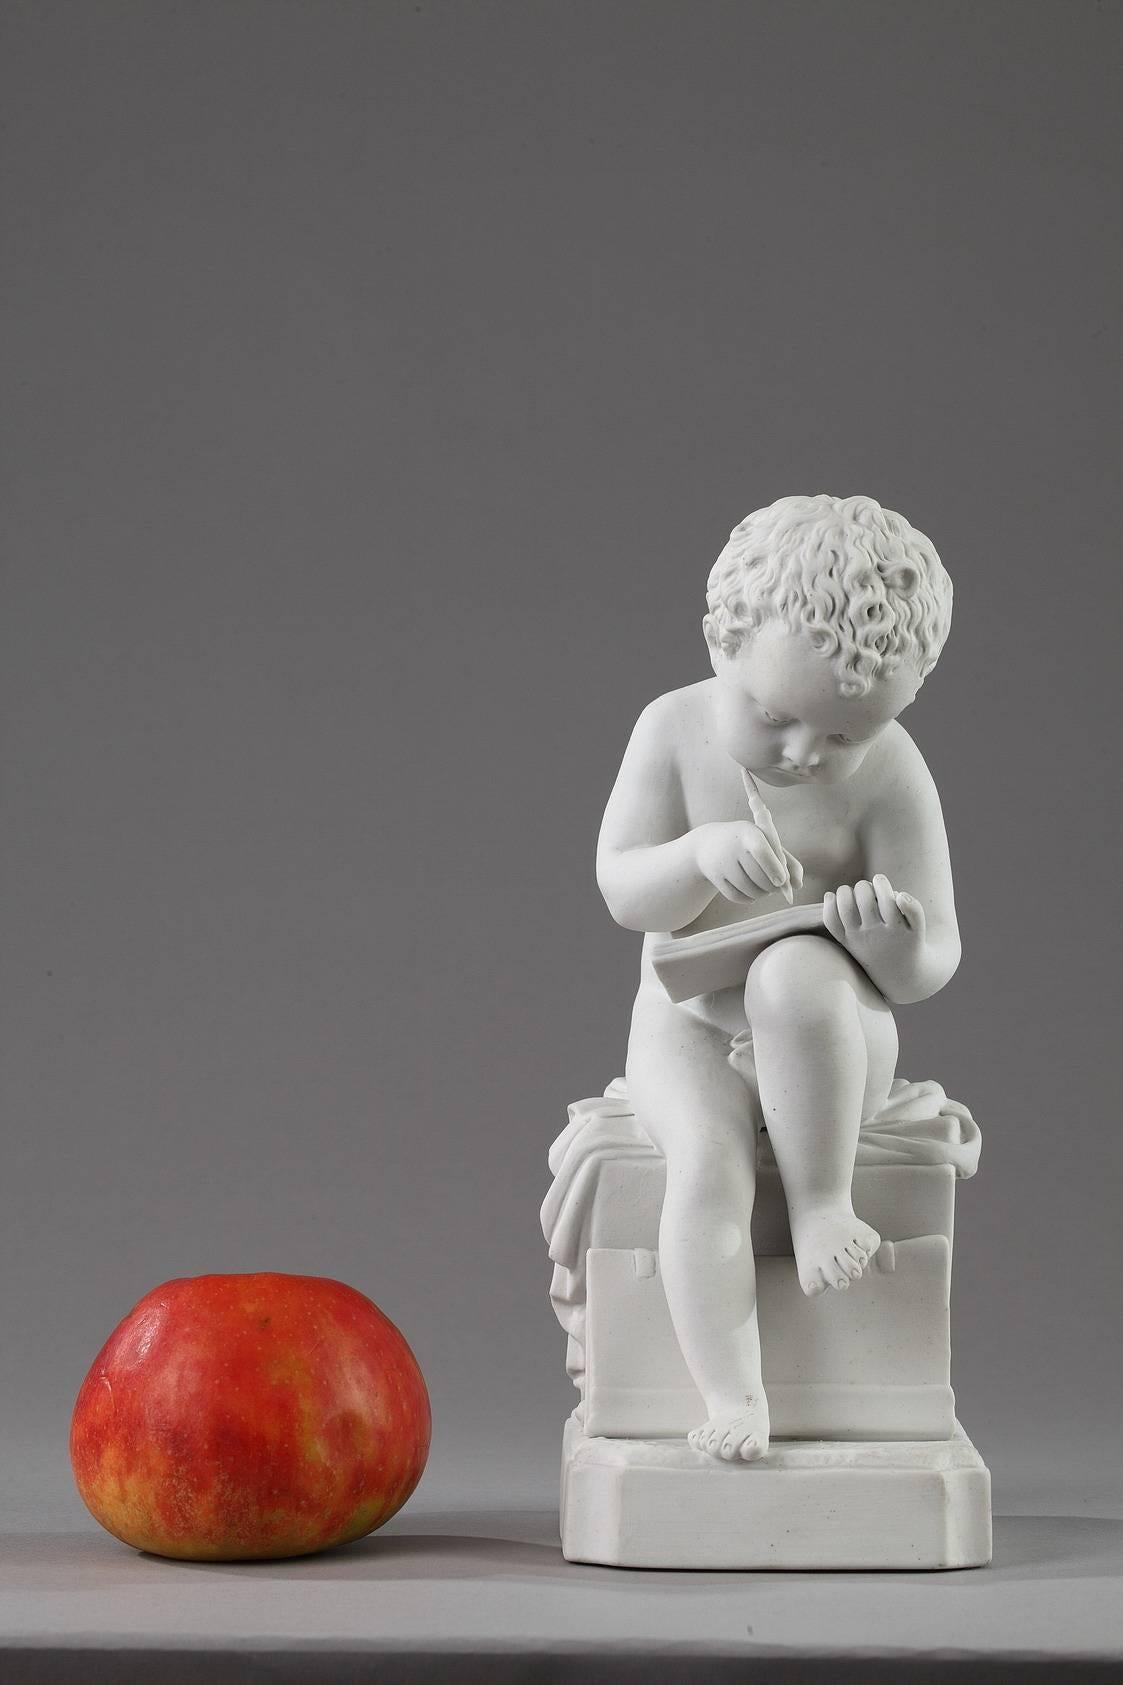 Statuette in?porcelain?biscuit featuring a child who is seated and writing or drawing. This piece was manufactured in Choisy-le-Roi after a model created around 1795 by Charles-Gabriel Sauvage, also called Lemire. The sculpture is a symbol of Study,